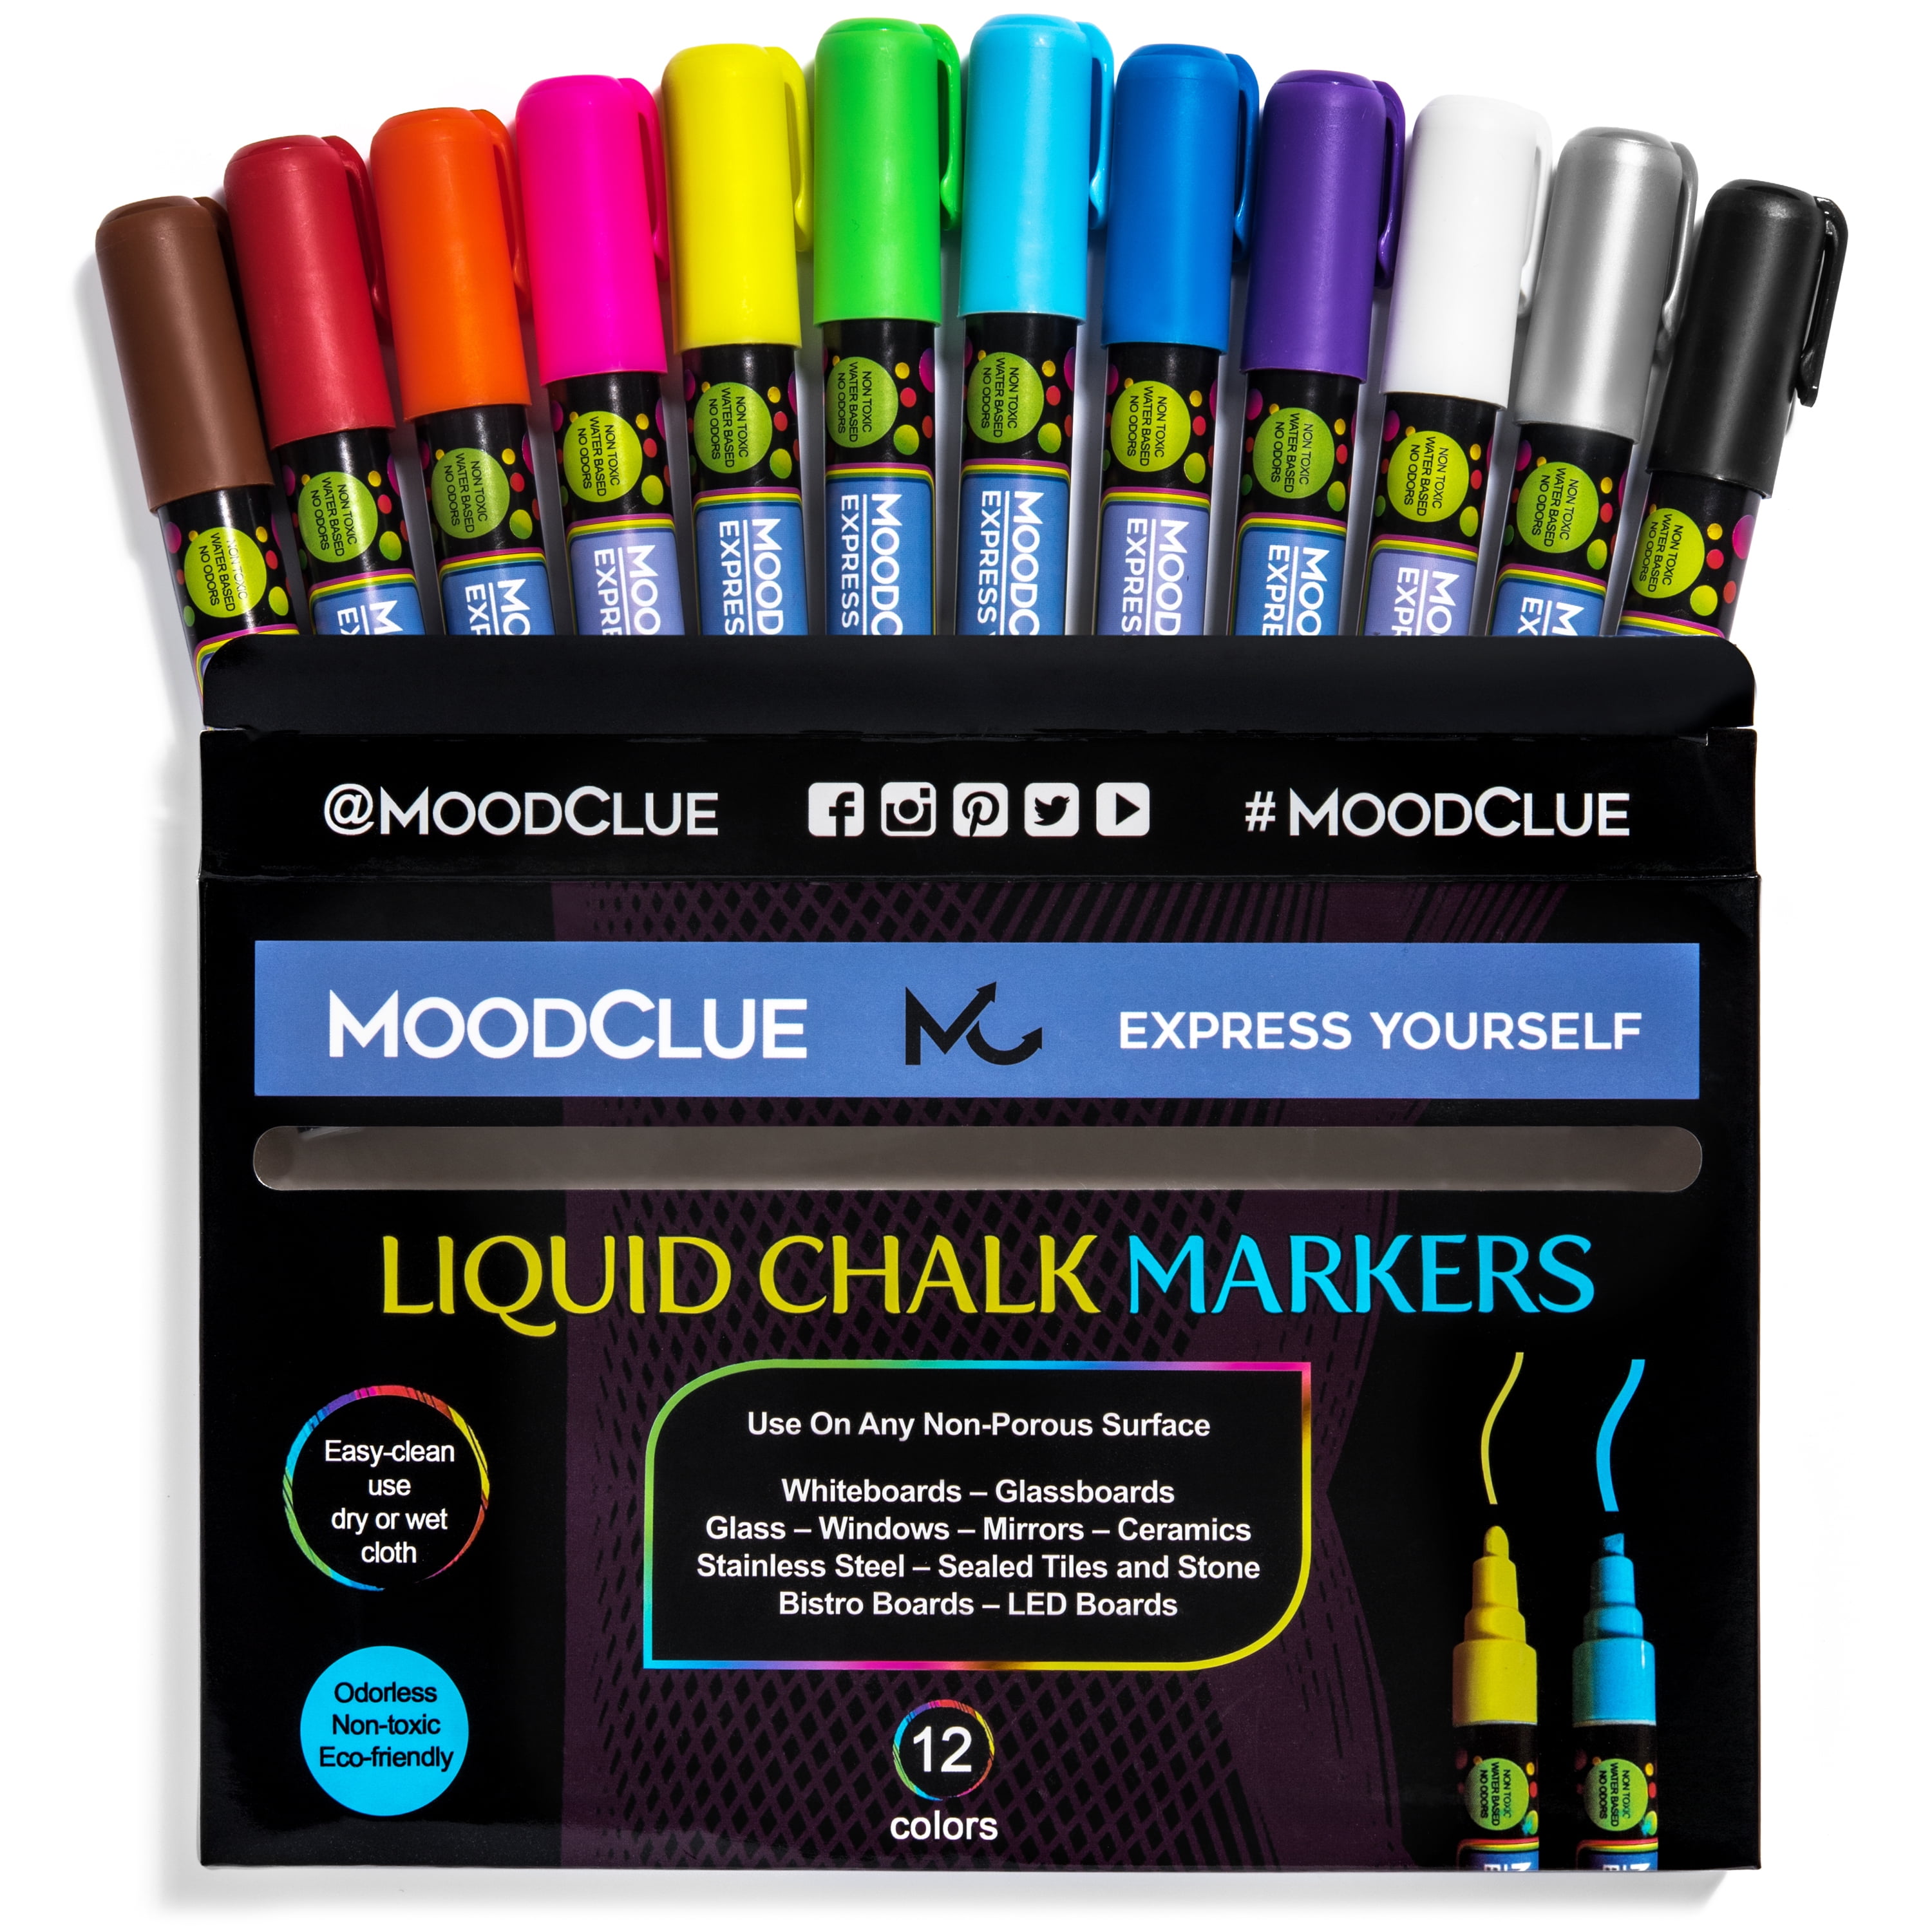 Dry Erase Markers For Toddlers